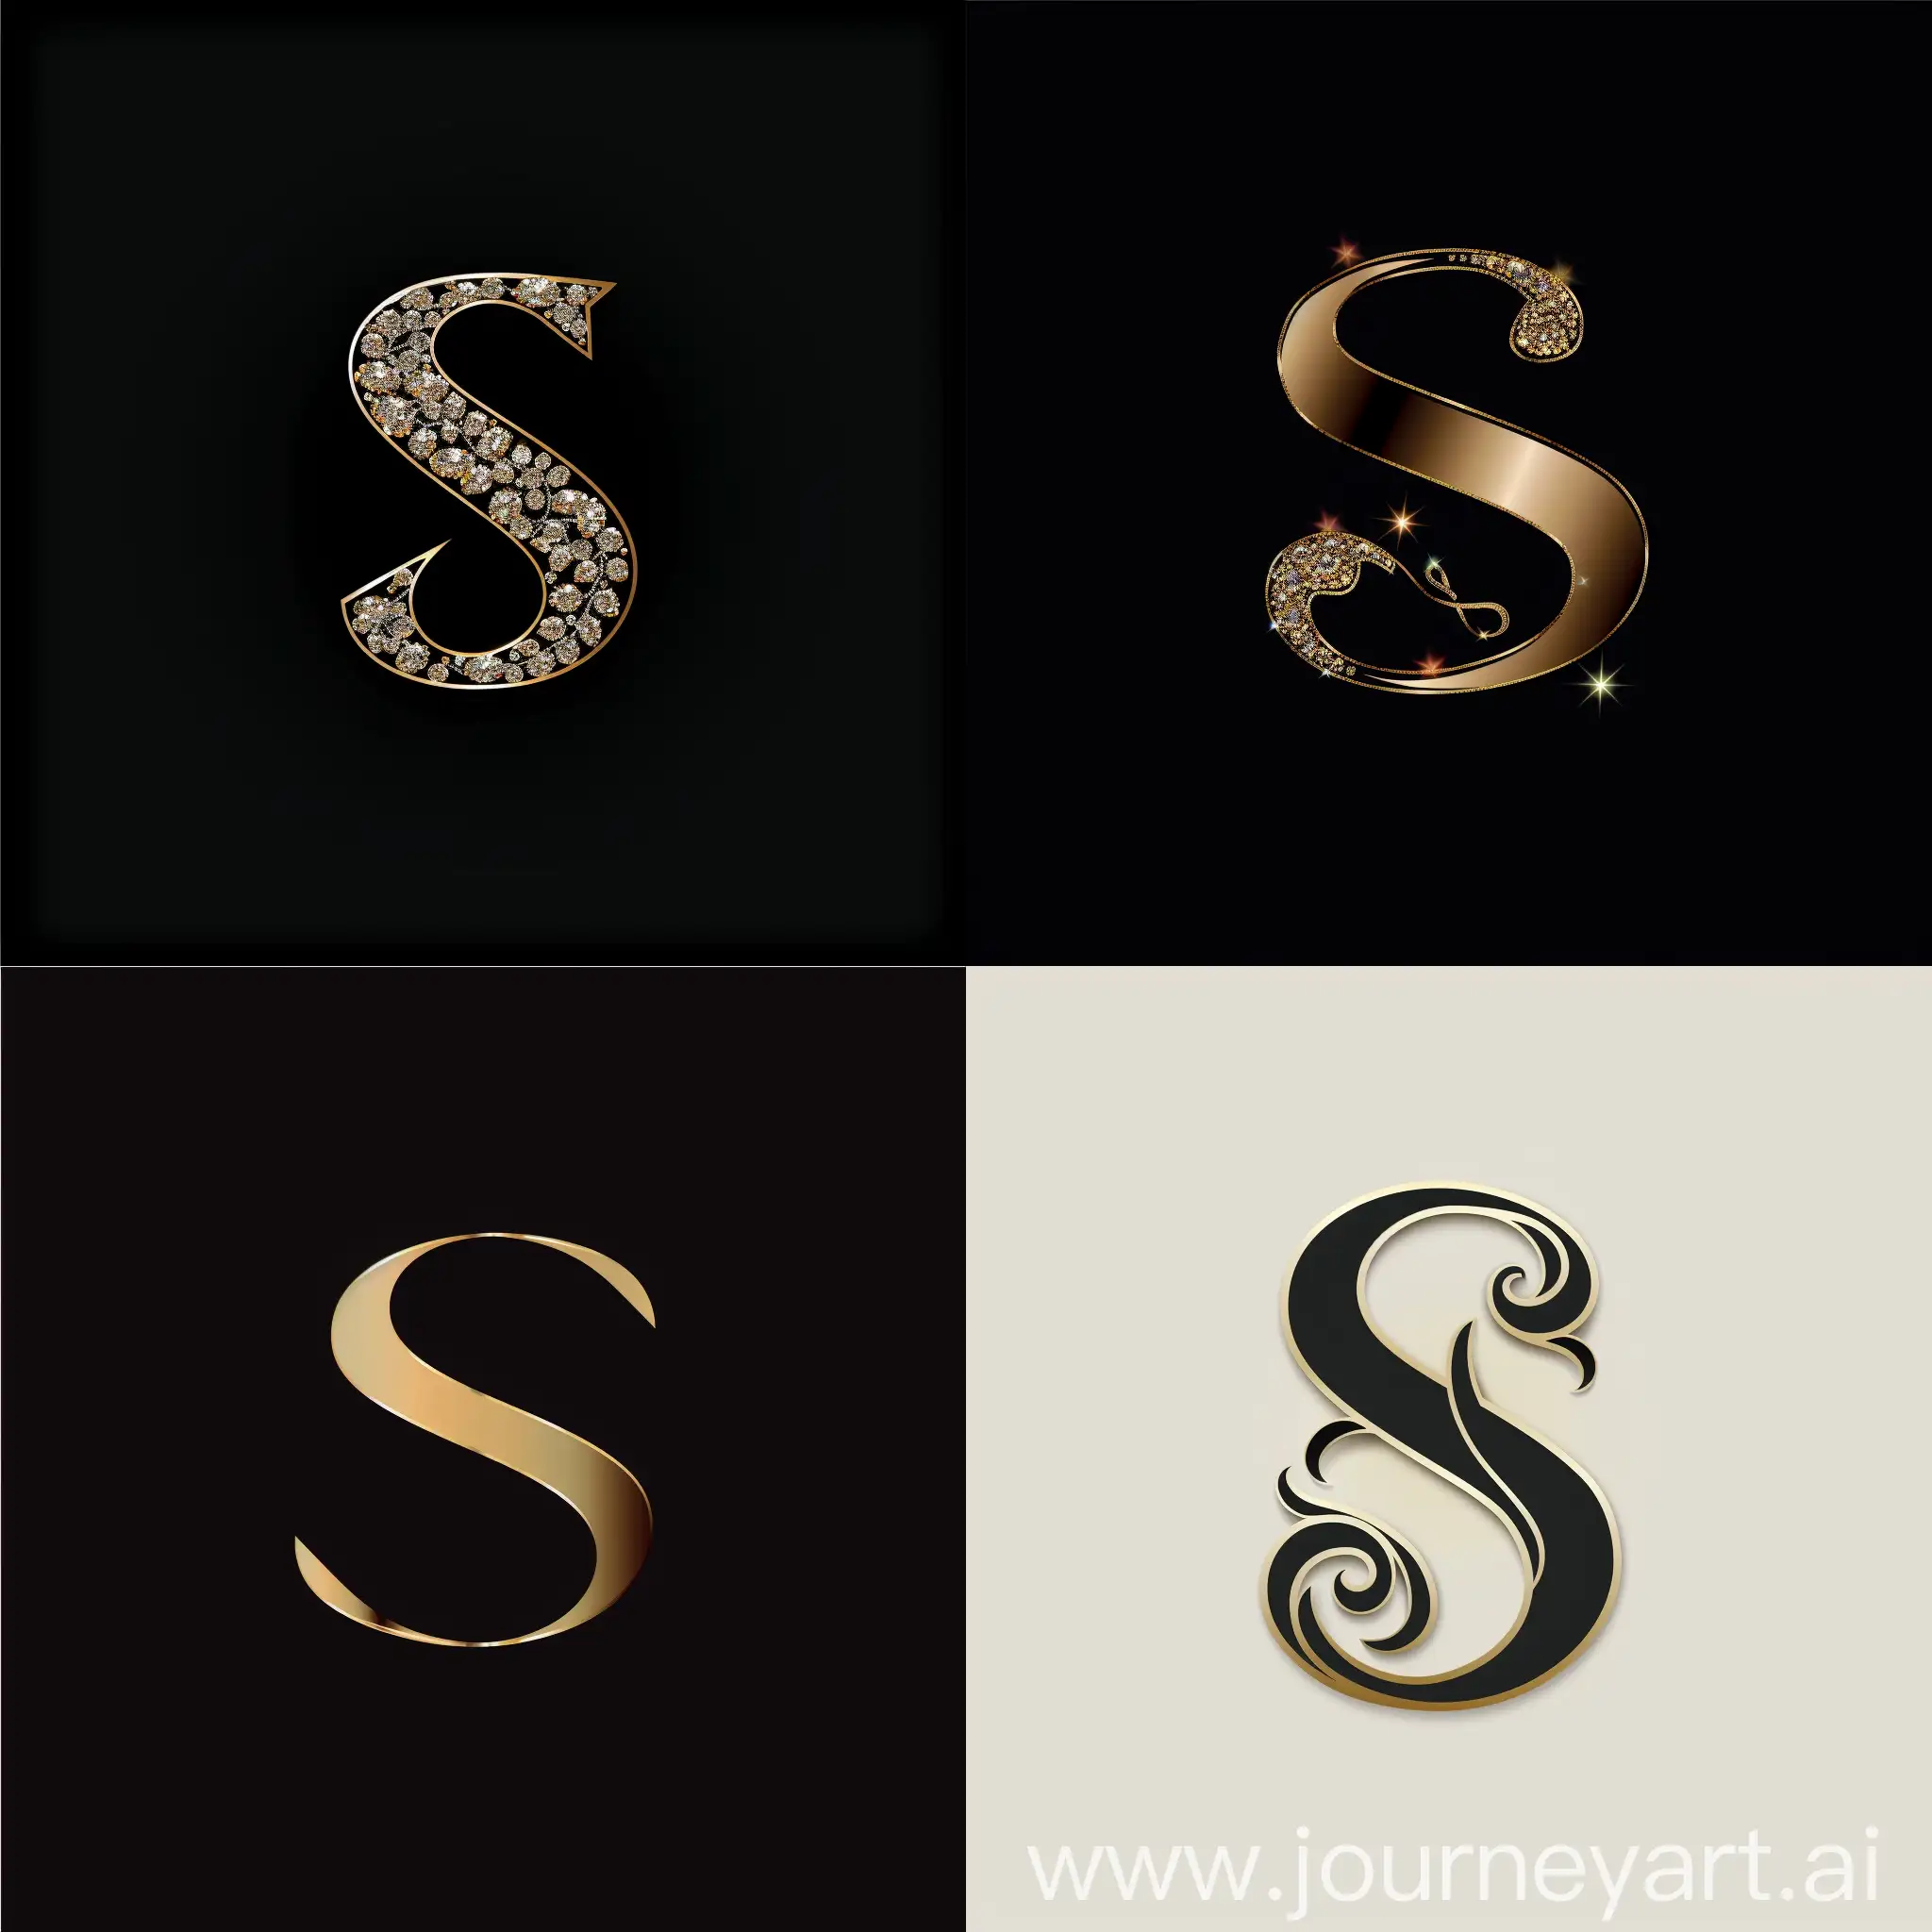 S letter logo design for jewellery shop in vector